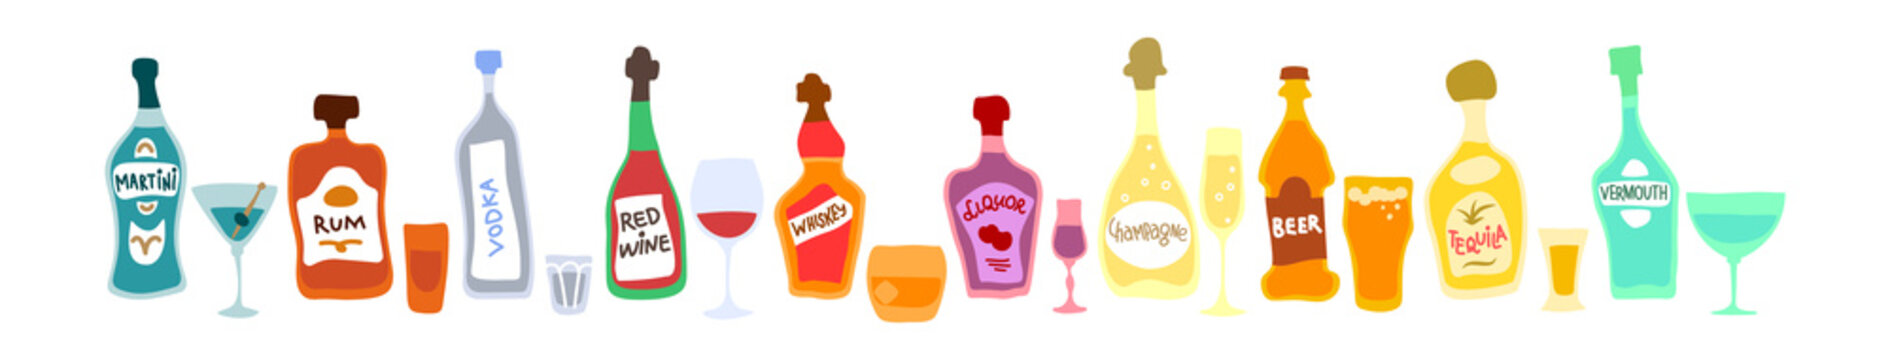 Collection bottle and glass in row. Freehand doodle style on white background. Colored cartoon sketch. Hand drawn image. Beer champagne red wine liquor vodka martini vermouth whiskey rum tequila